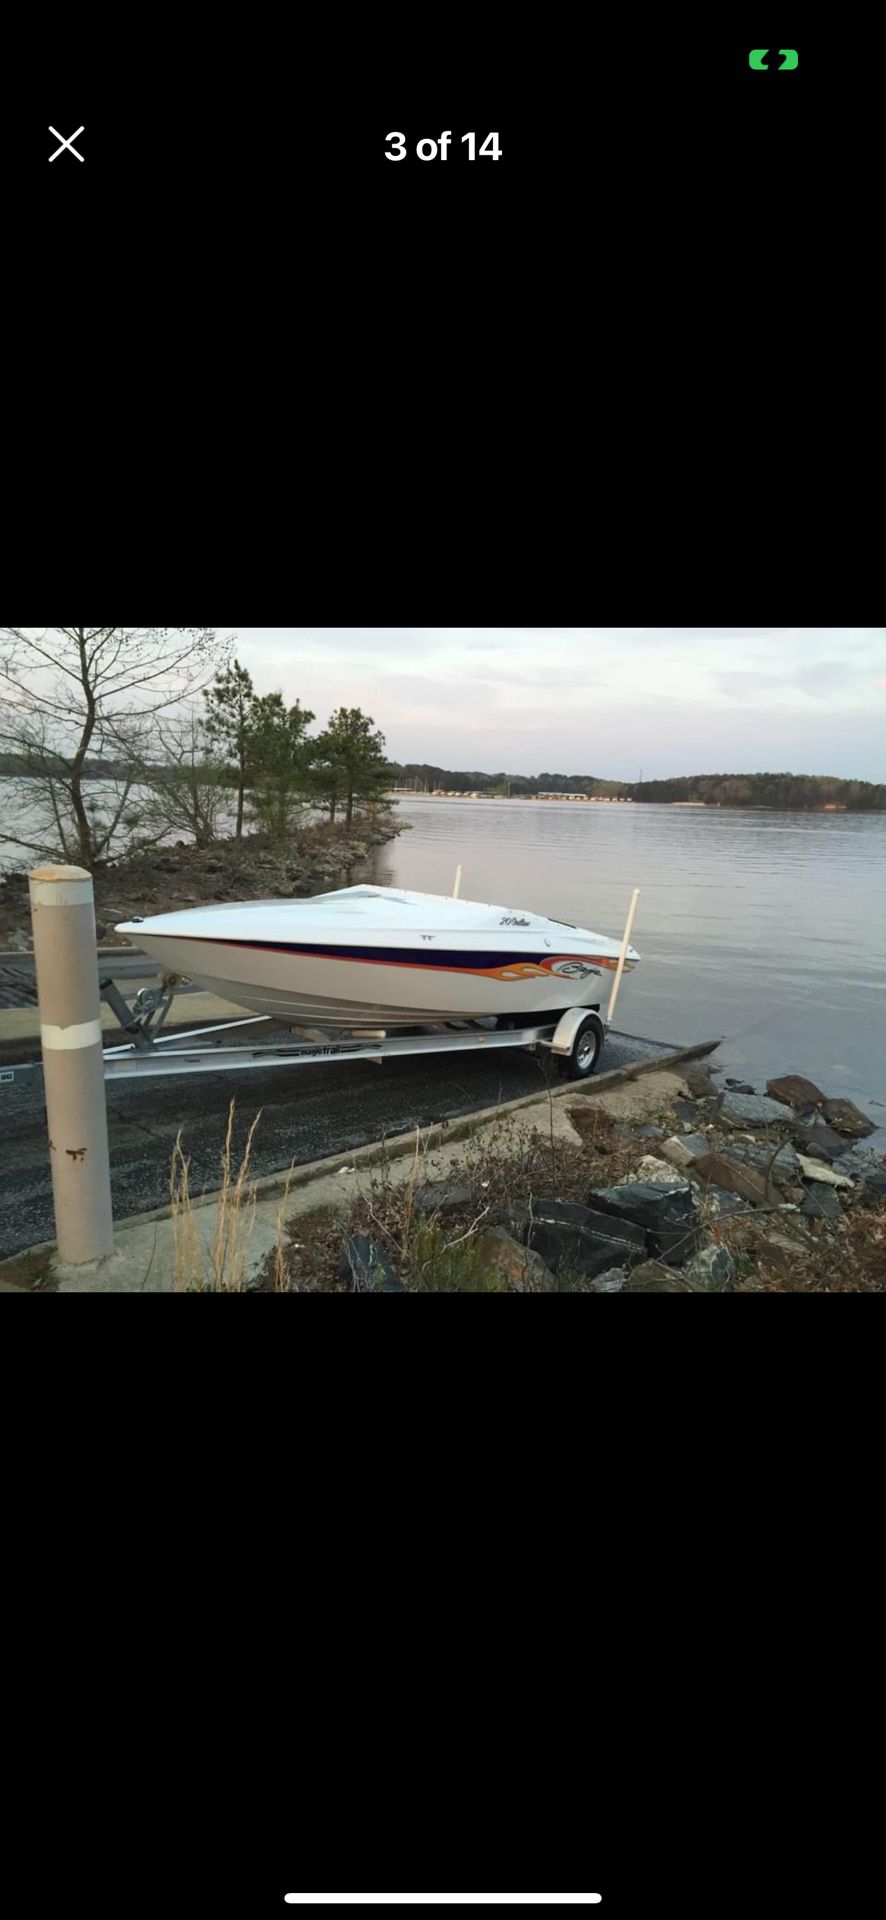 Boat for sale!